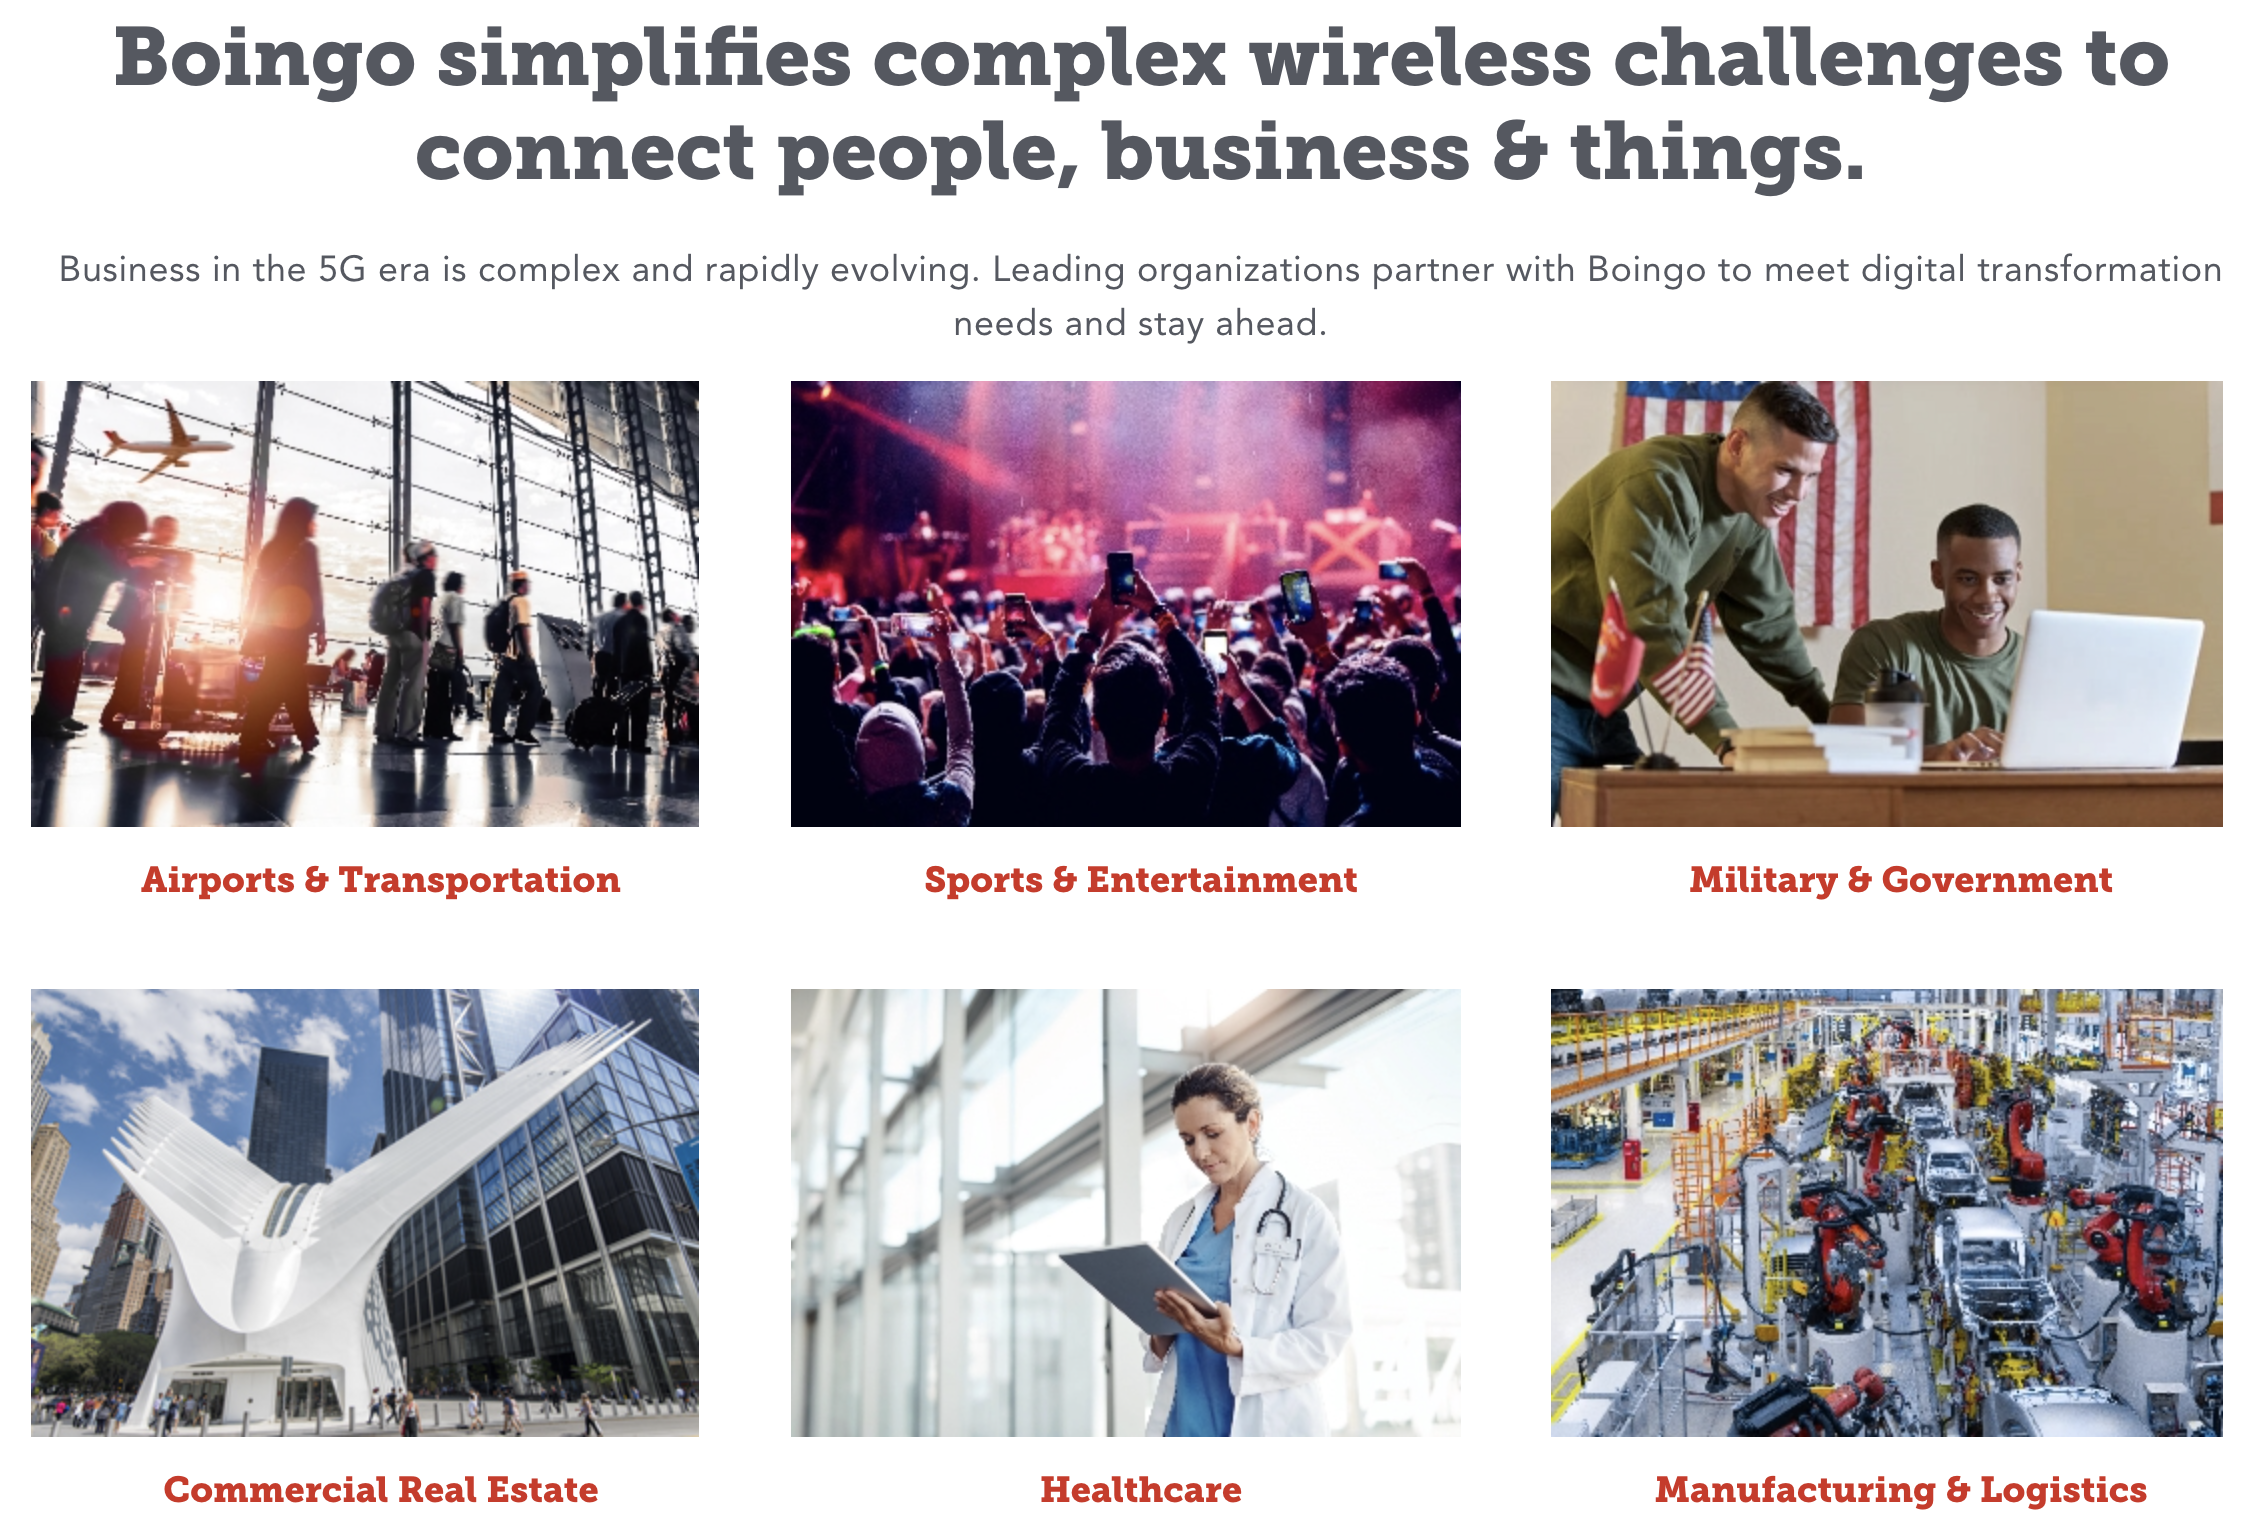 A screenshot of Boingo's website that features their tagline, "Boingo simplifies complex wireless challenges to connect people, business & things." The page also includes images of the different industries they serve.